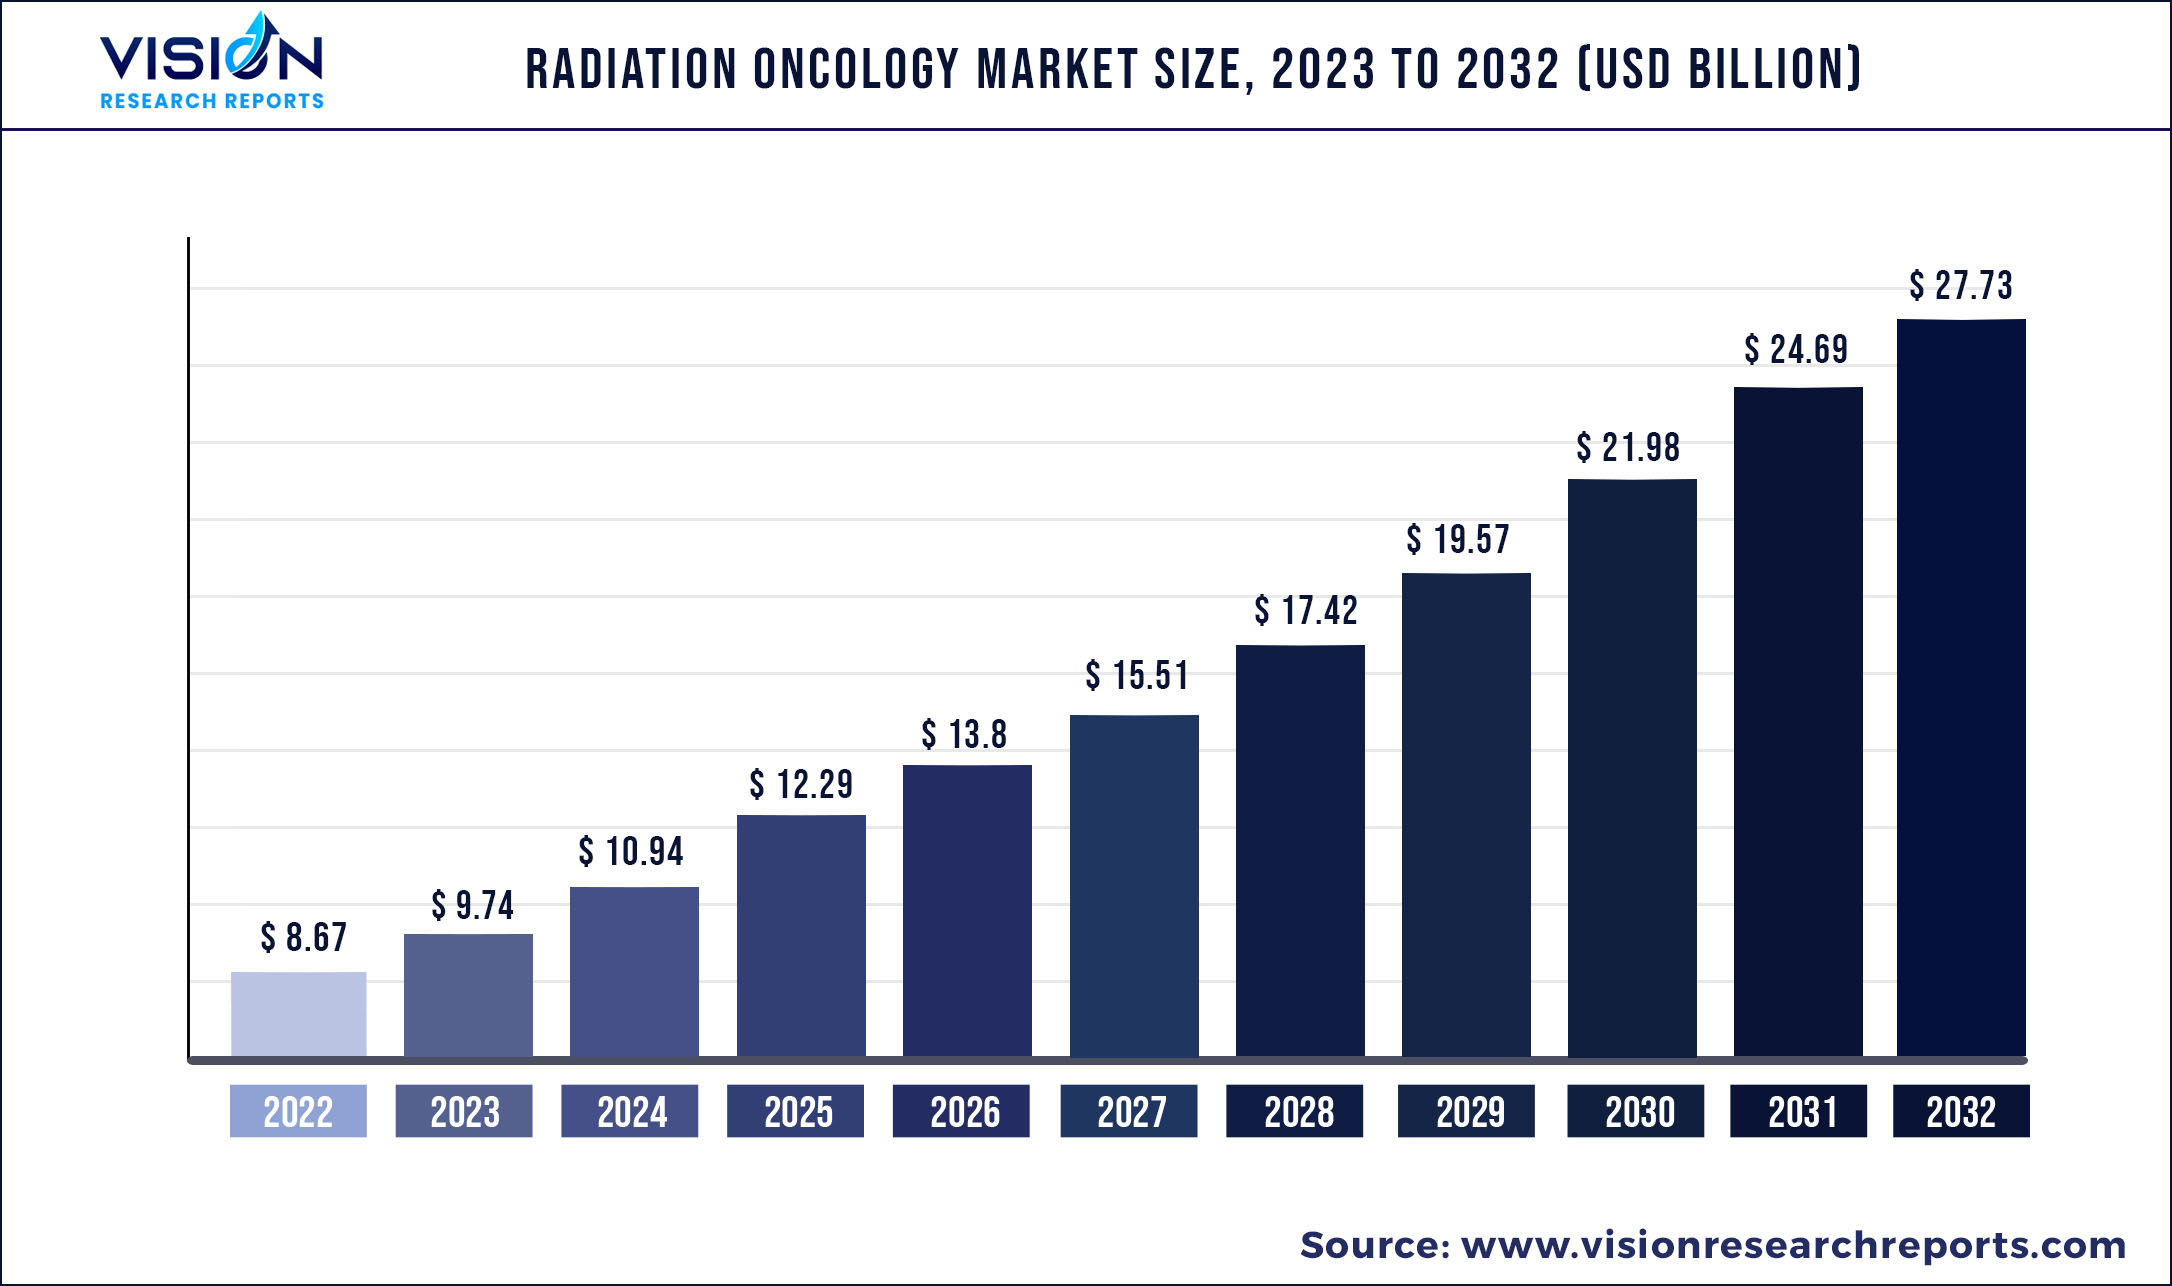 Radiation Oncology Market Size 2023 to 2032